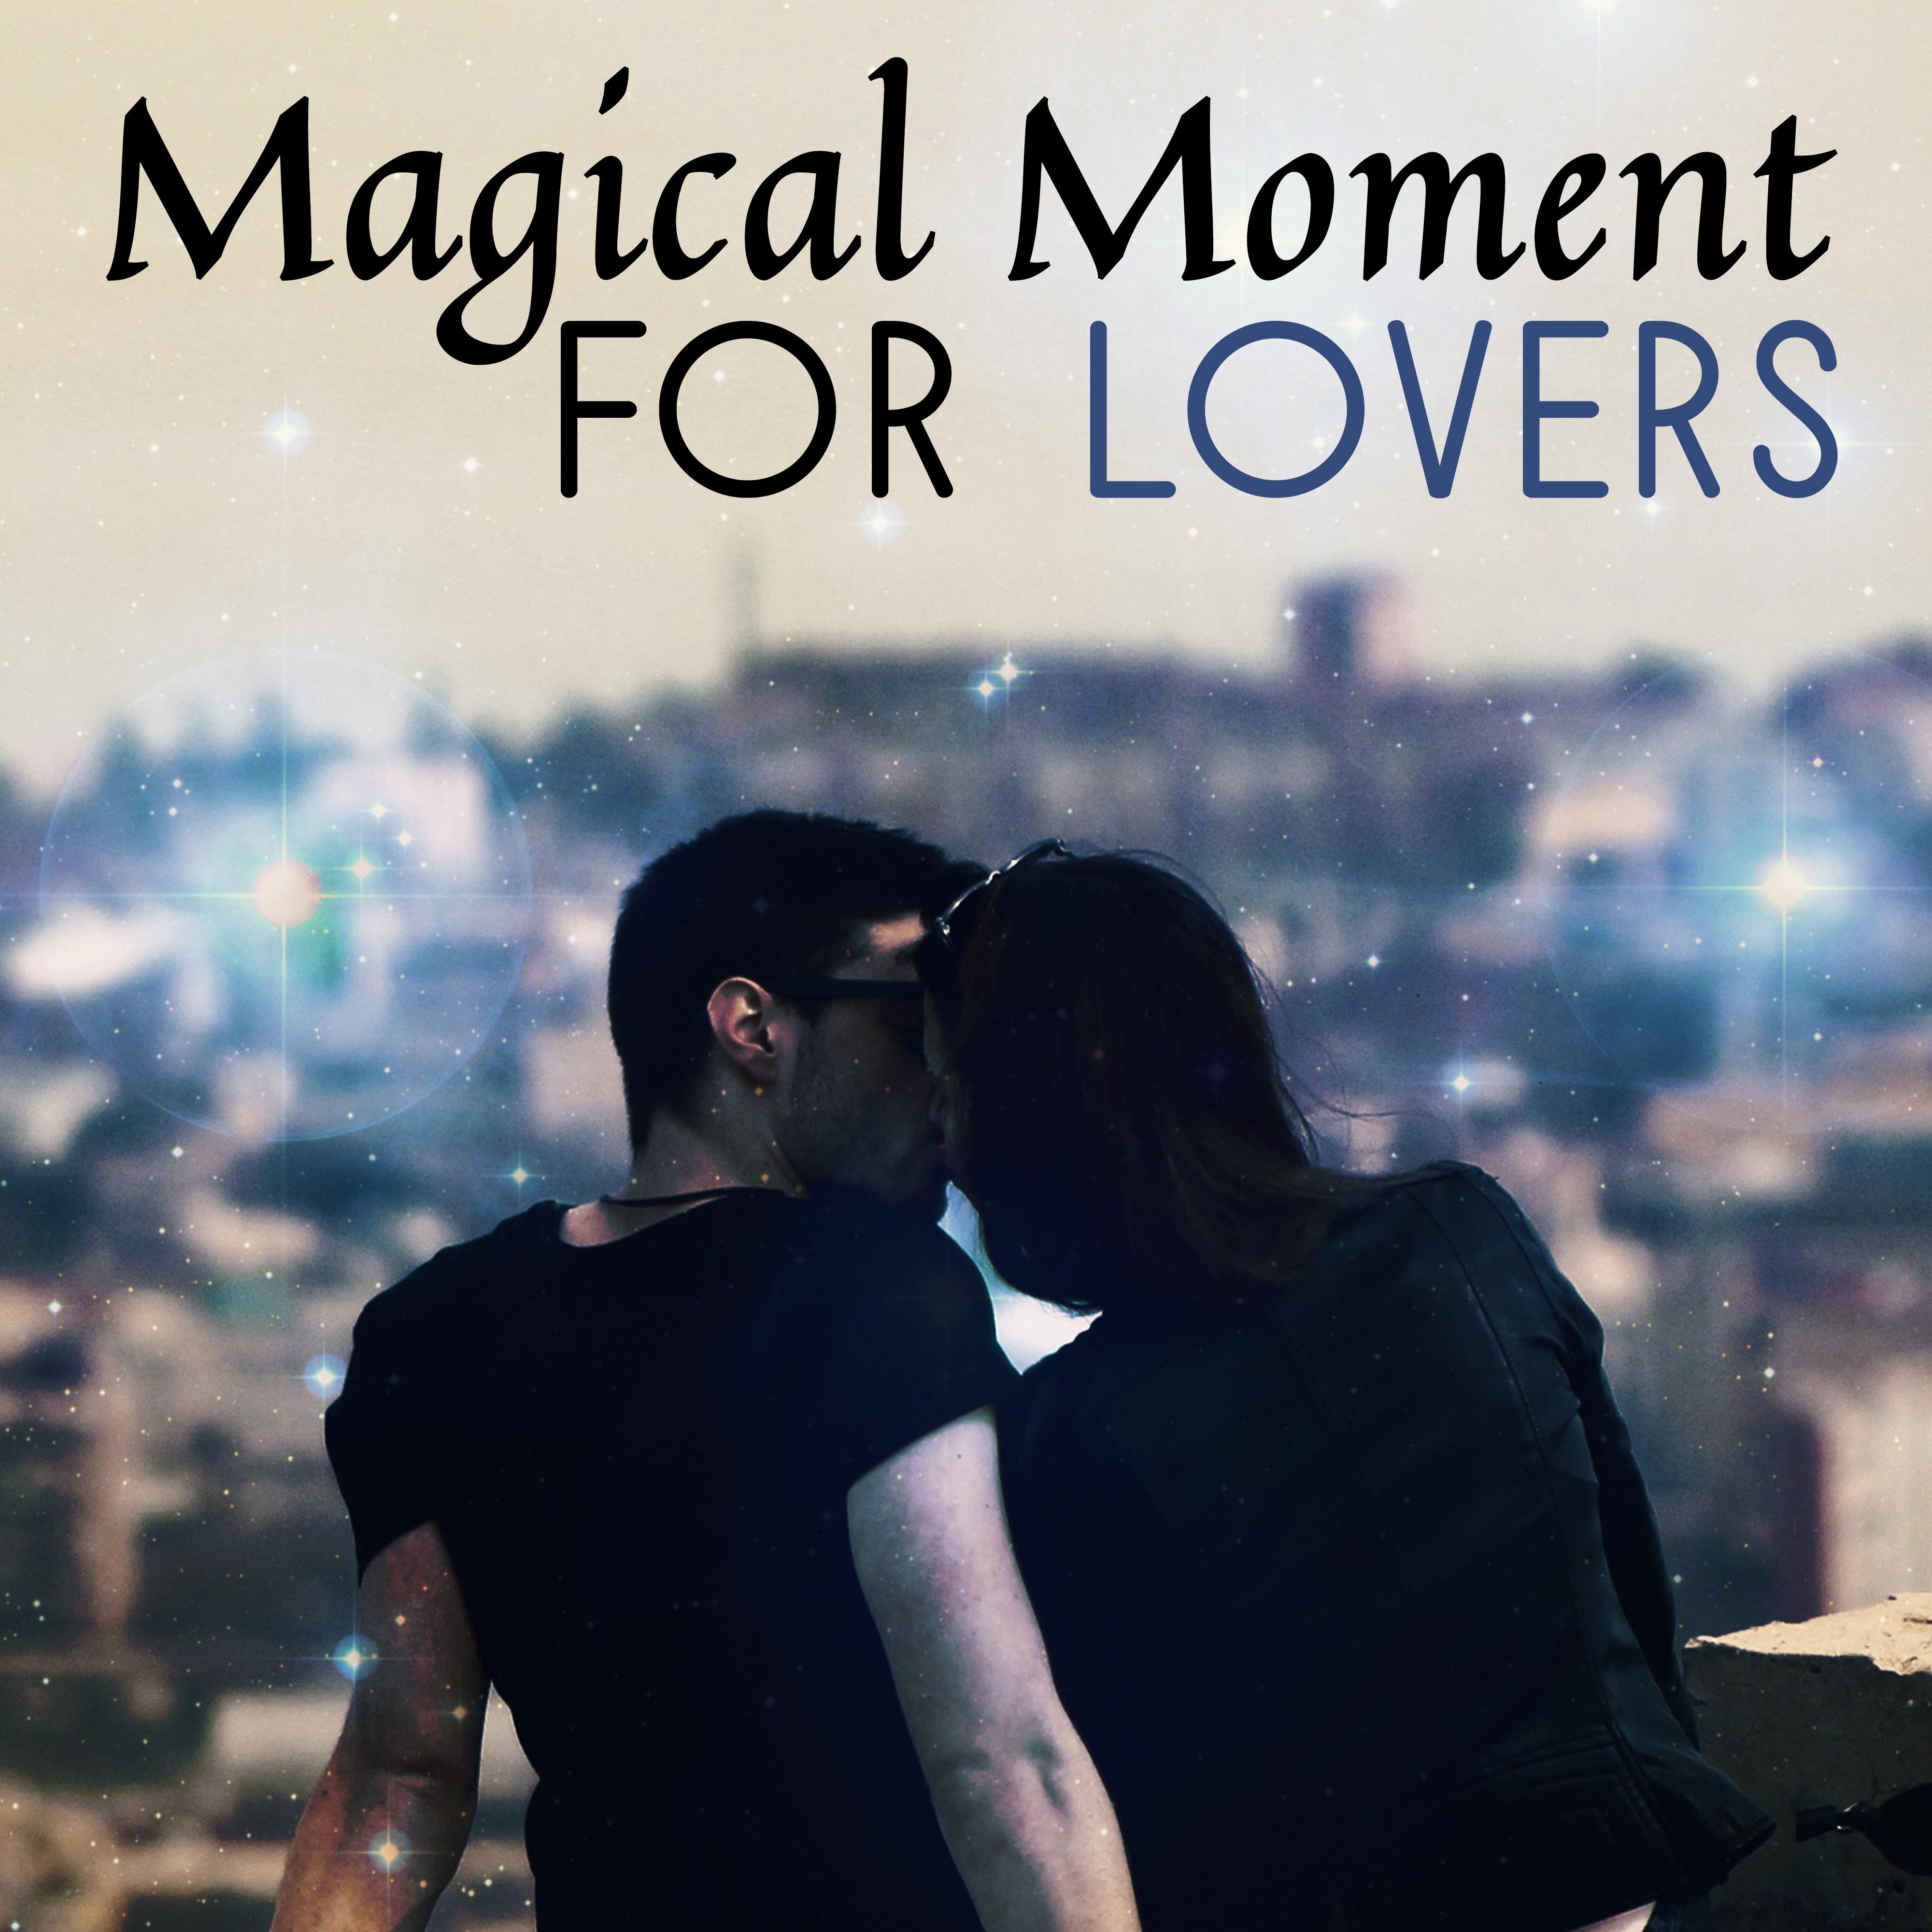 Magical Moment for Lovers  Romantic Date, Smooth Jazz for Relaxation, Dinner by Candlelight, Sexy Jazz, Romantic Dance